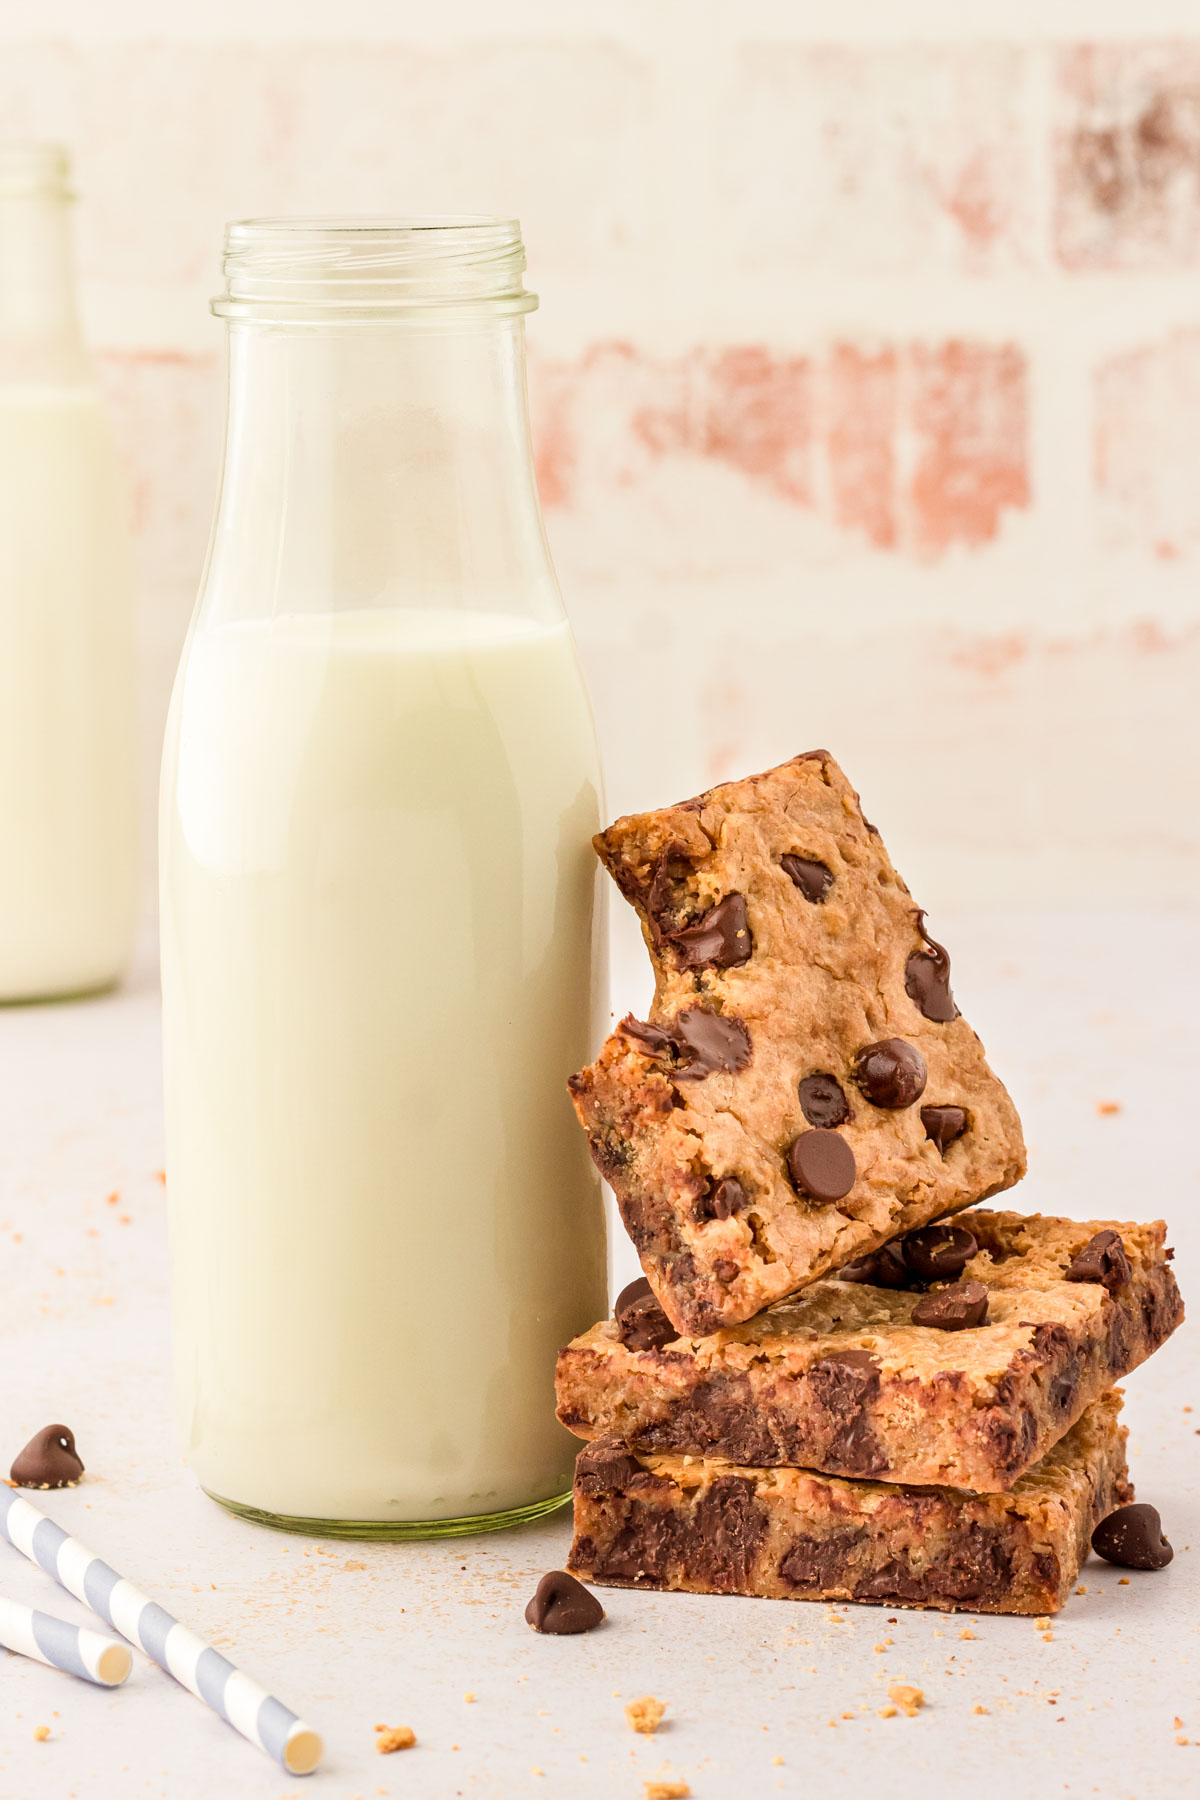 A stack of graham cracker bars next to a milk bottle, the top bar is leaning against it and missing a bite.